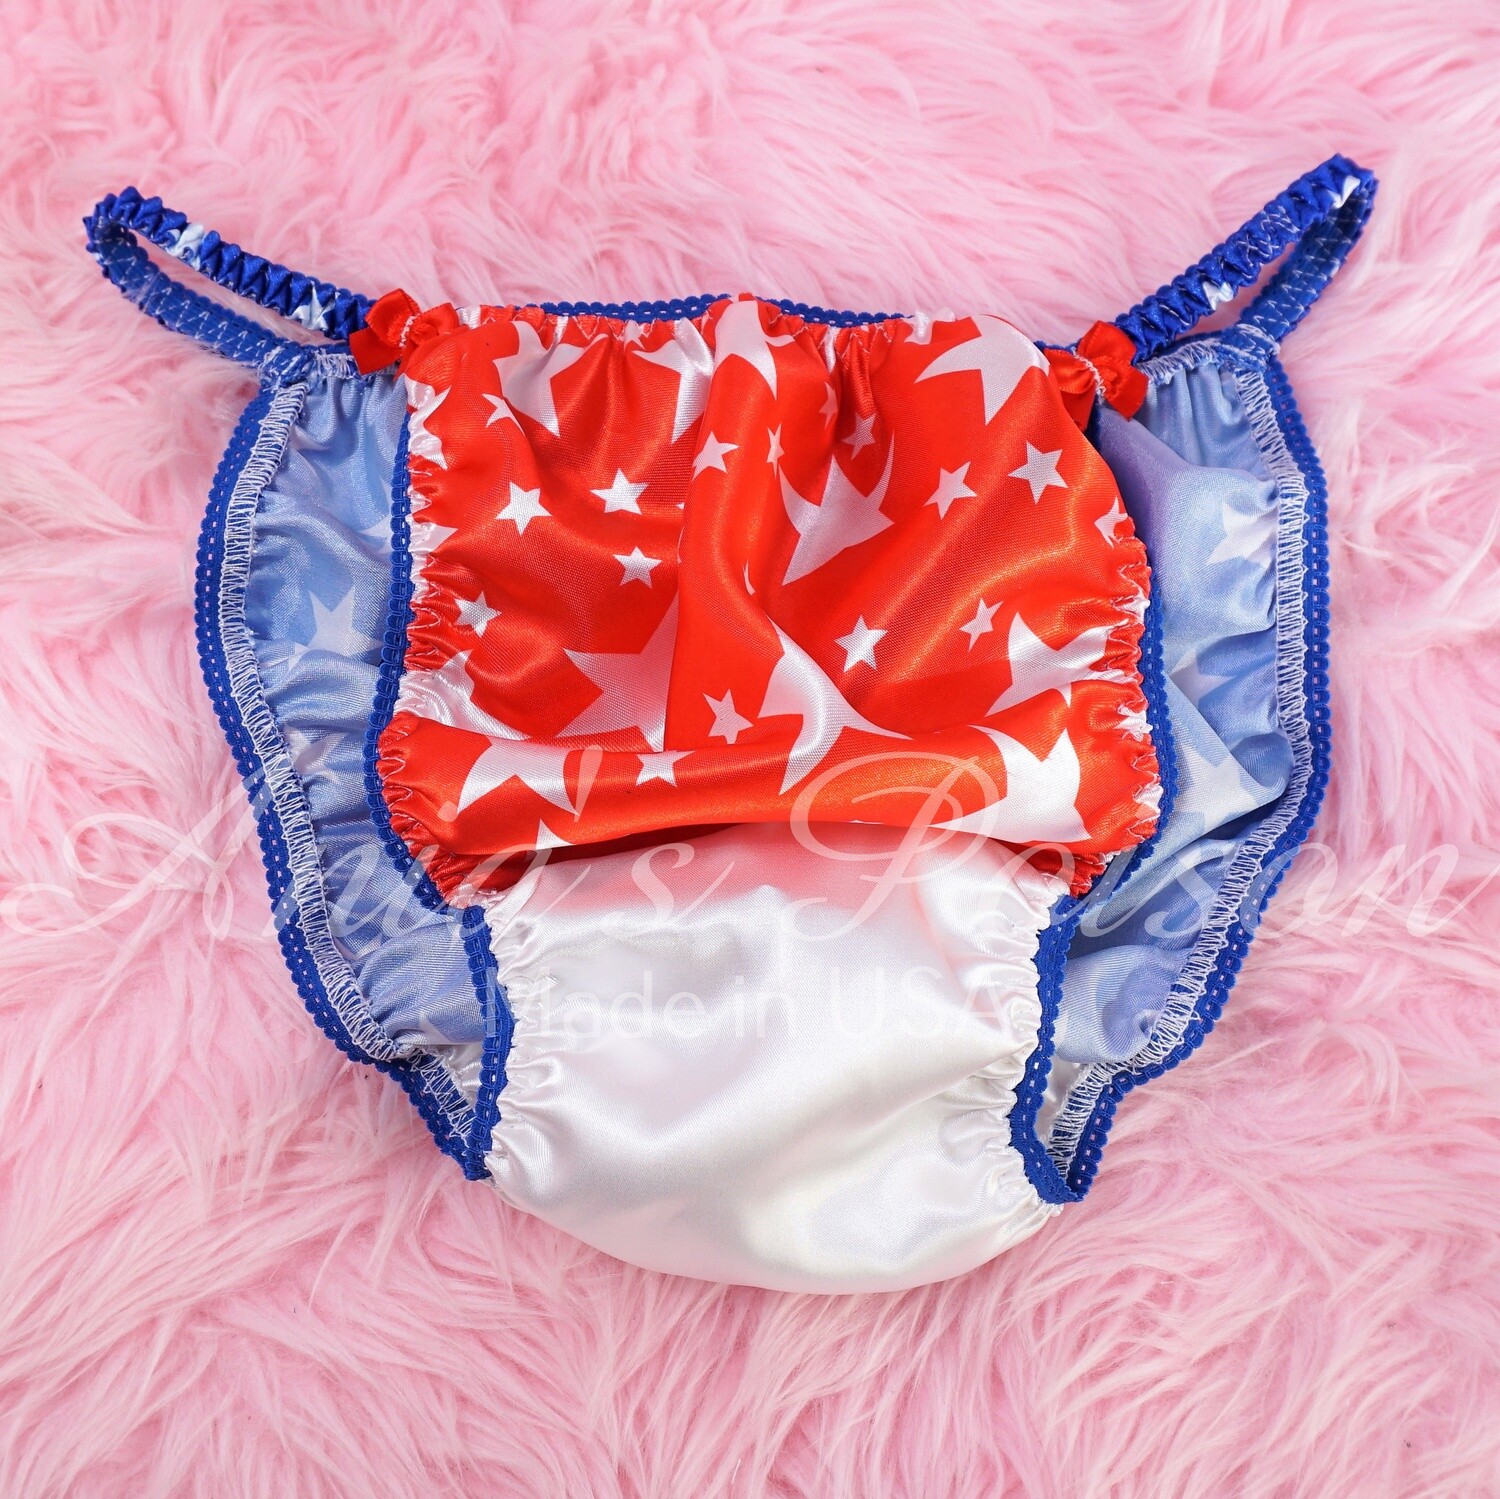 Ania's Poison July 4th Panties 100% polyester Red White and Blue Stars string bikini sissy mens underwear Patriotic USA print panties set OR bra OR skirt